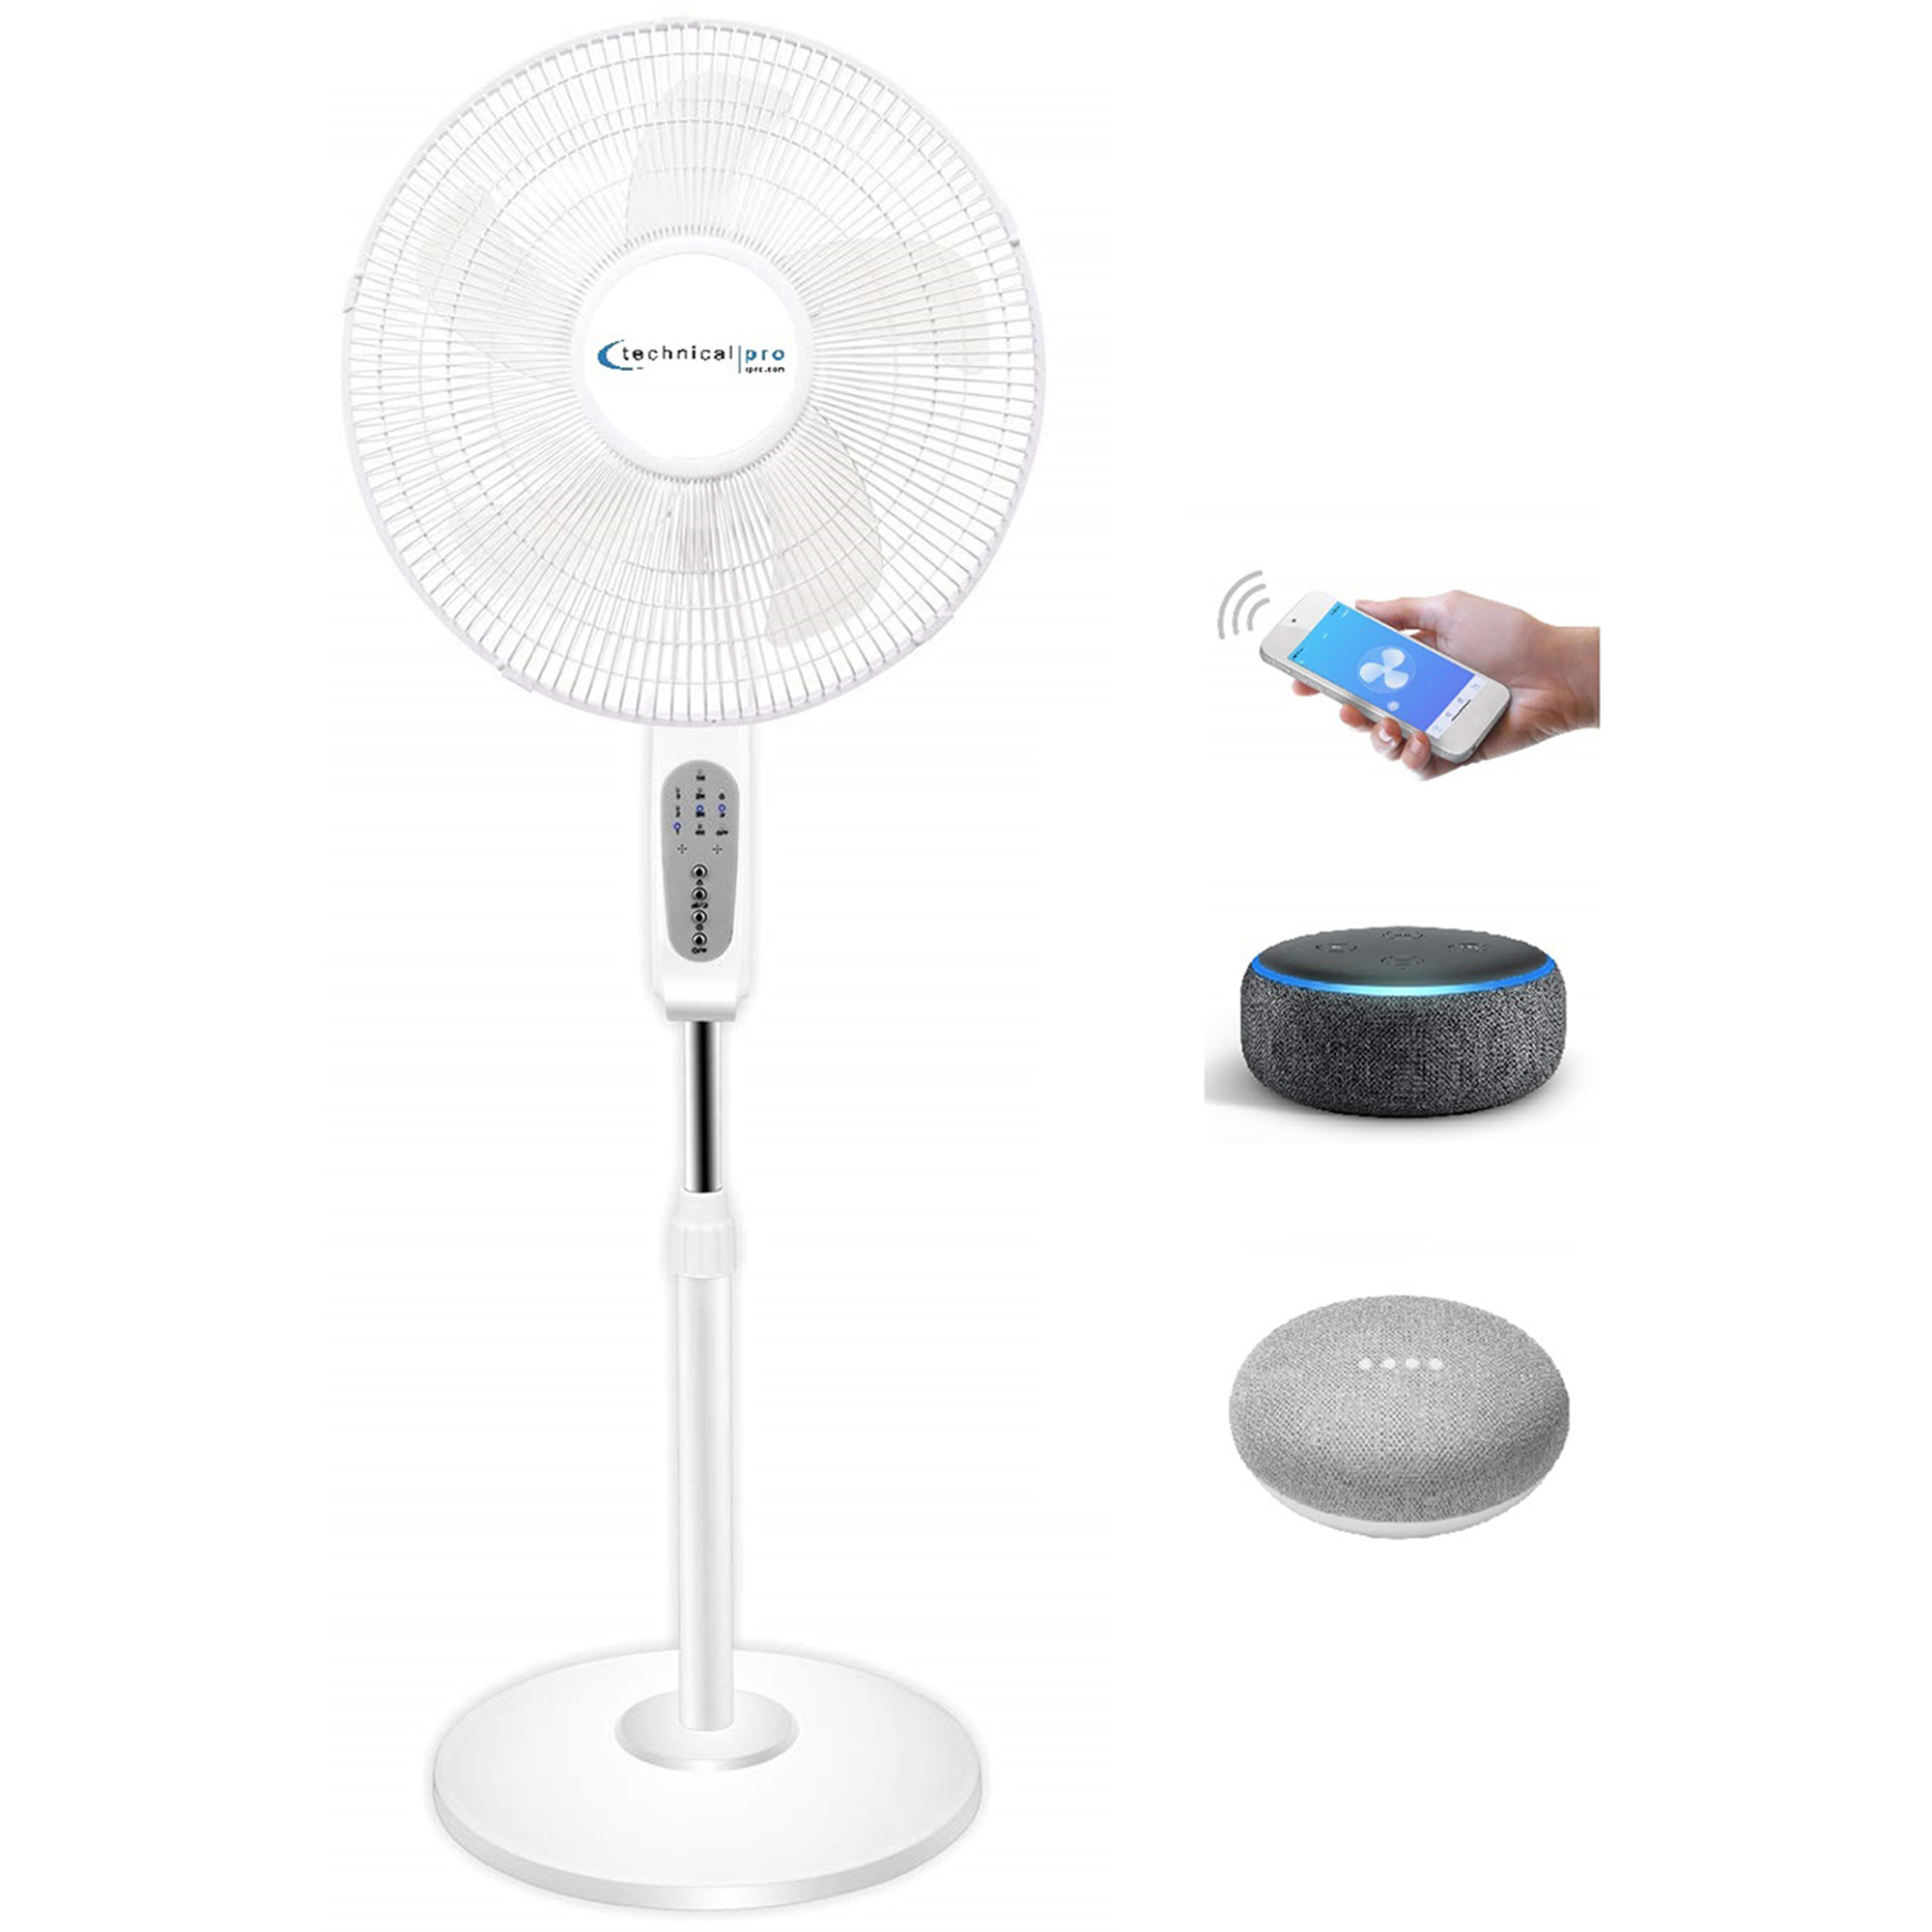 Technical Pro WIFI Enabled 16 Inch Standing Fan With Oscillating Feature And Compatible With Amazon Alexa/Google